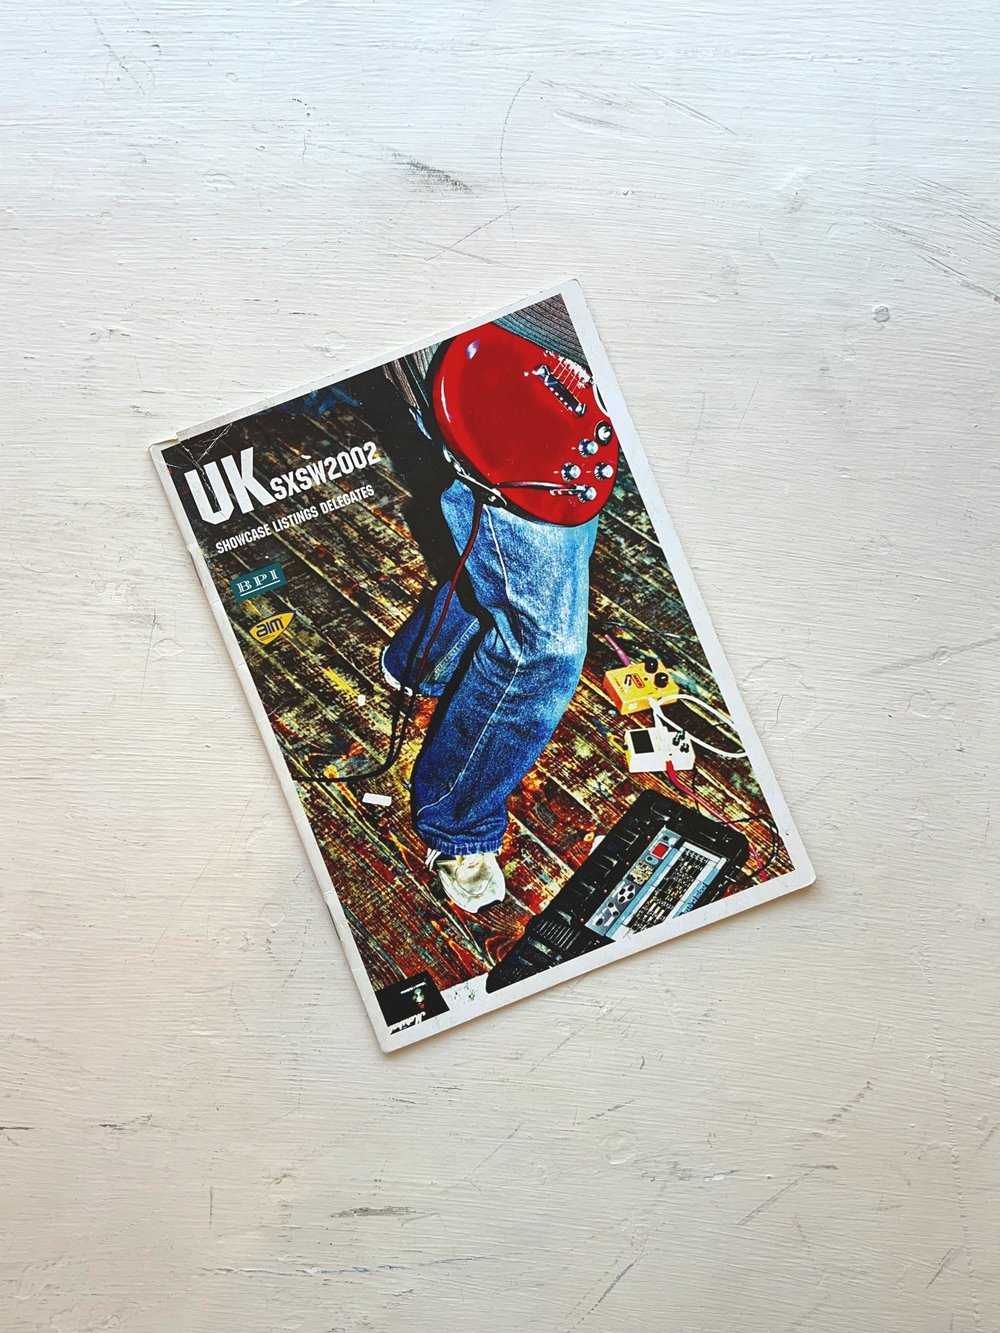 The first official UK showcase at SXSW guide created by BU (2002)